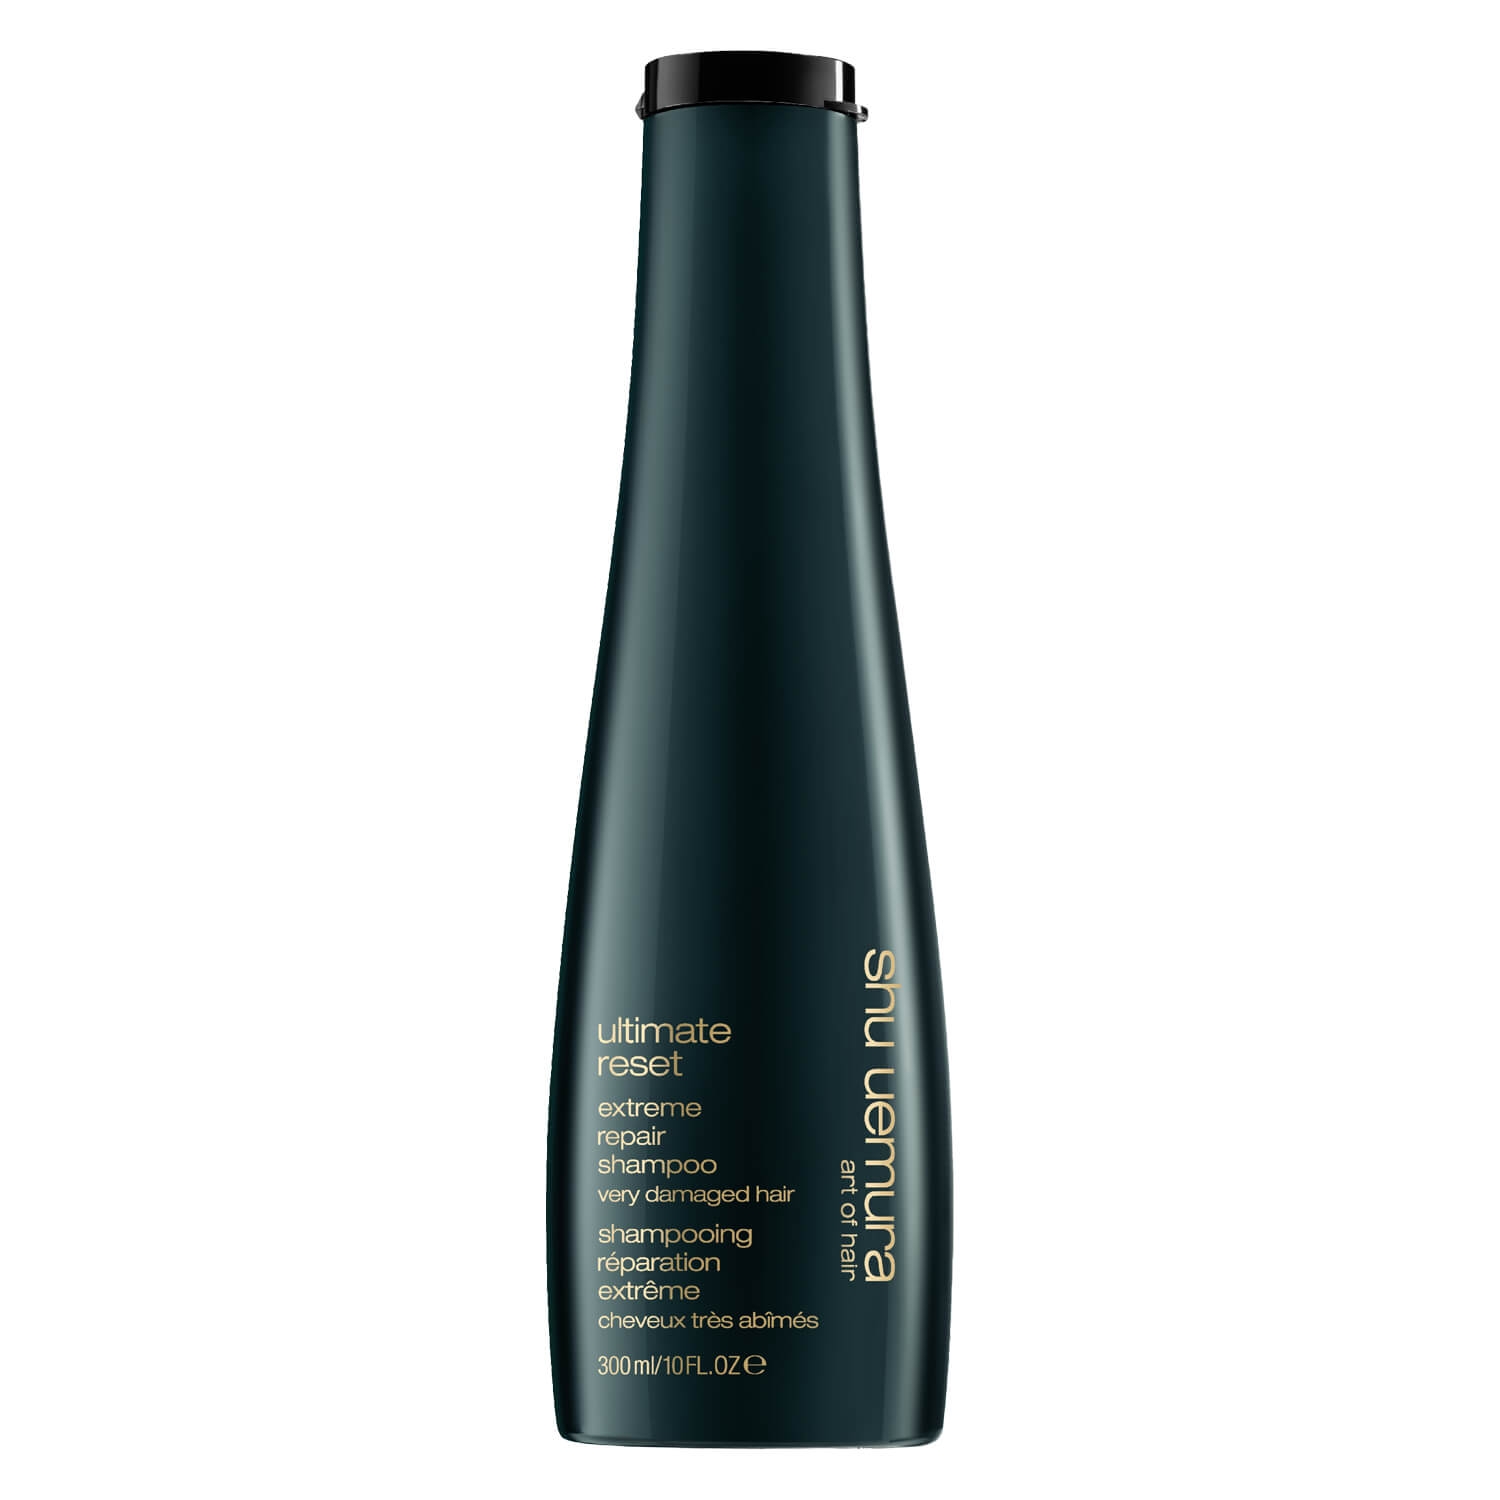 Product image from Ultimate Reset - Shampoo